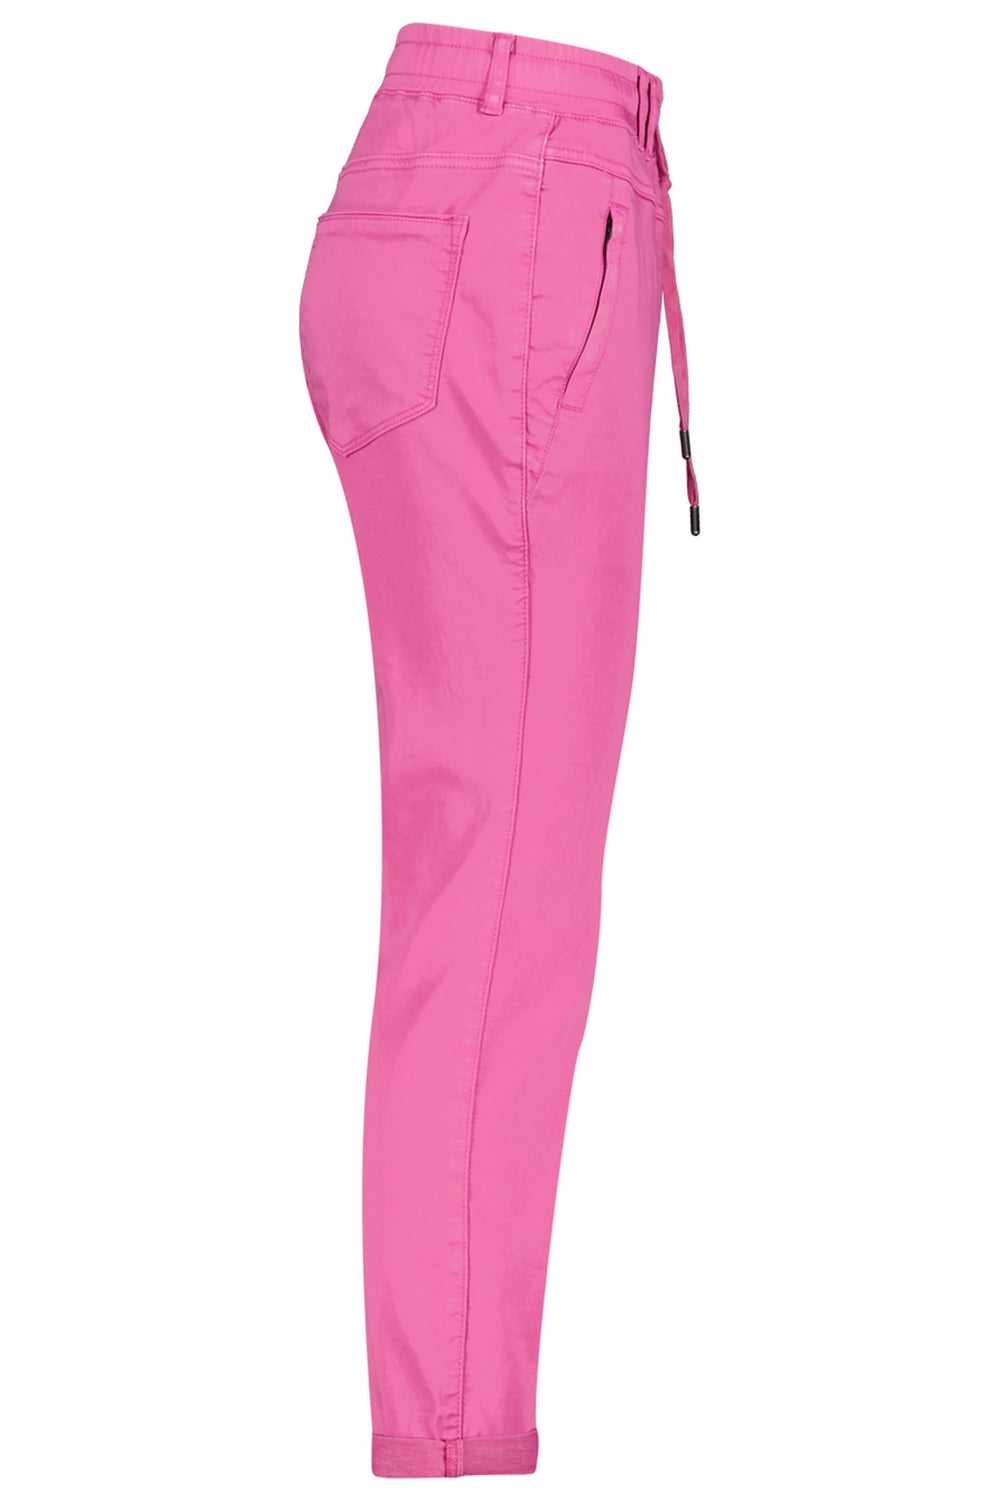 Red Button SRB4154 Tessy Cyclaam Pink Cropped Jogger Trousers - Dotique